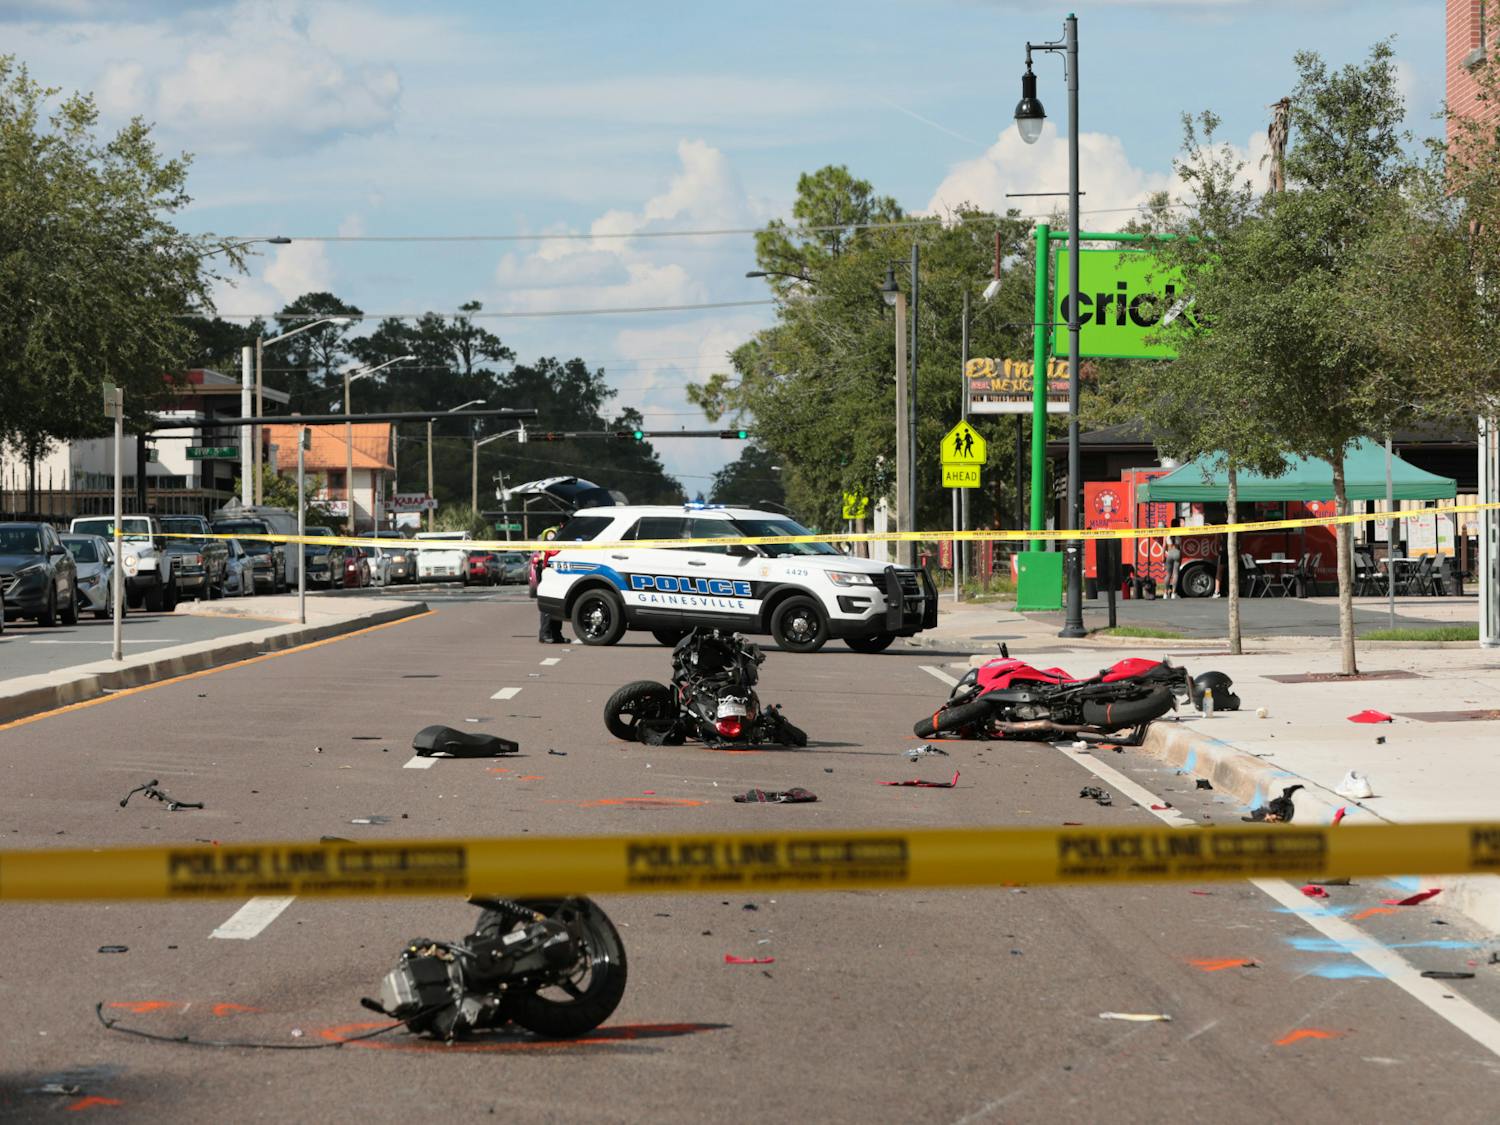 Remnants of a motorcycle accident are seen on the corner of 3rd Avenue and West University Avenue in front of Krispy Kreme on Friday, Oct. 1, 2021.